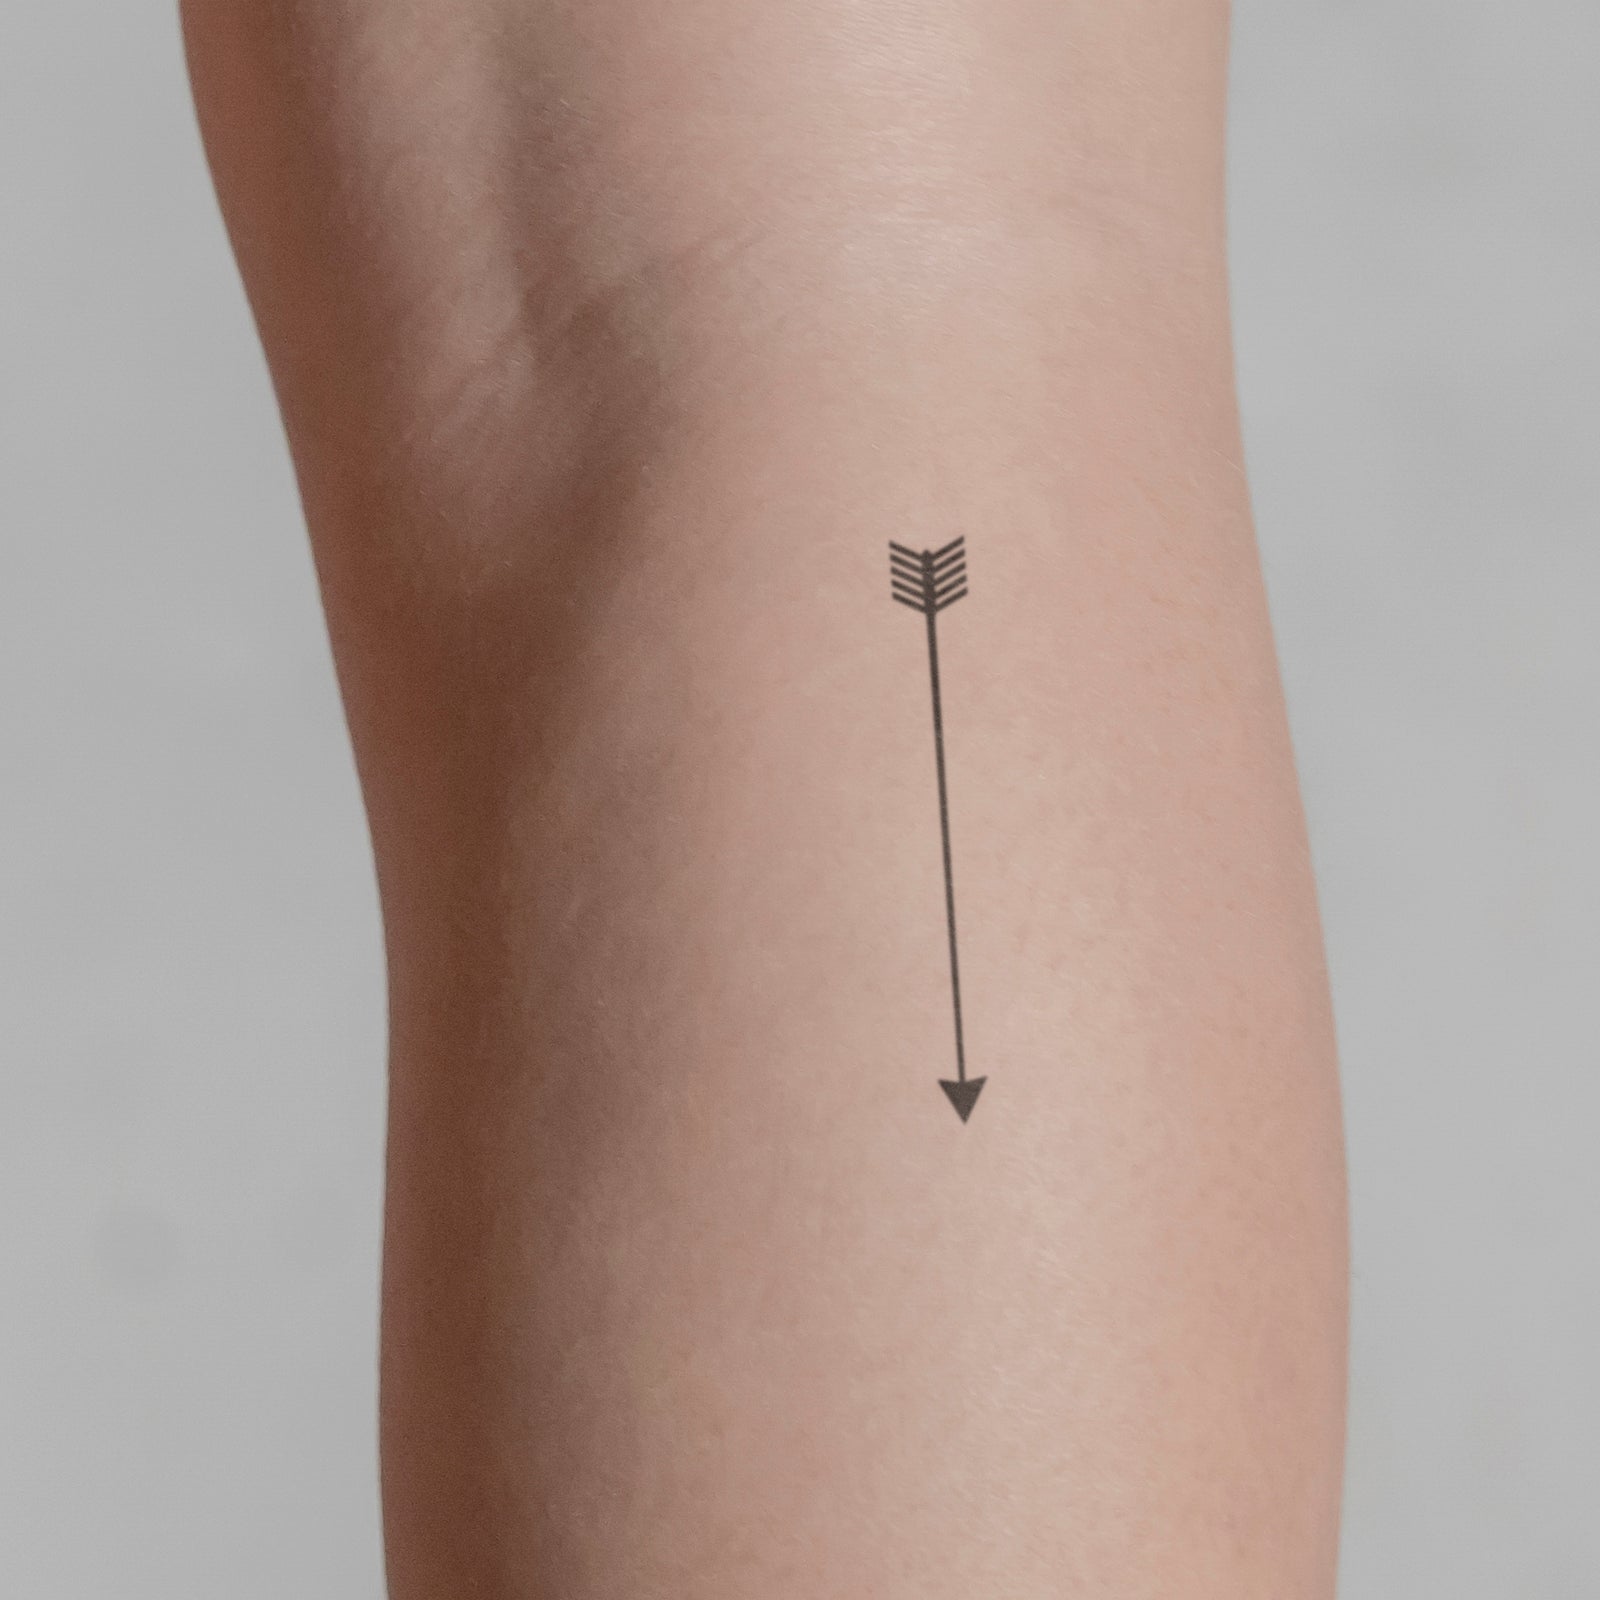 Unique Arrow Tattoos Design with Meanings - So Simple Yet Meaningful | Arrow  tattoos for women, Arrow tattoo design, Feather tattoos